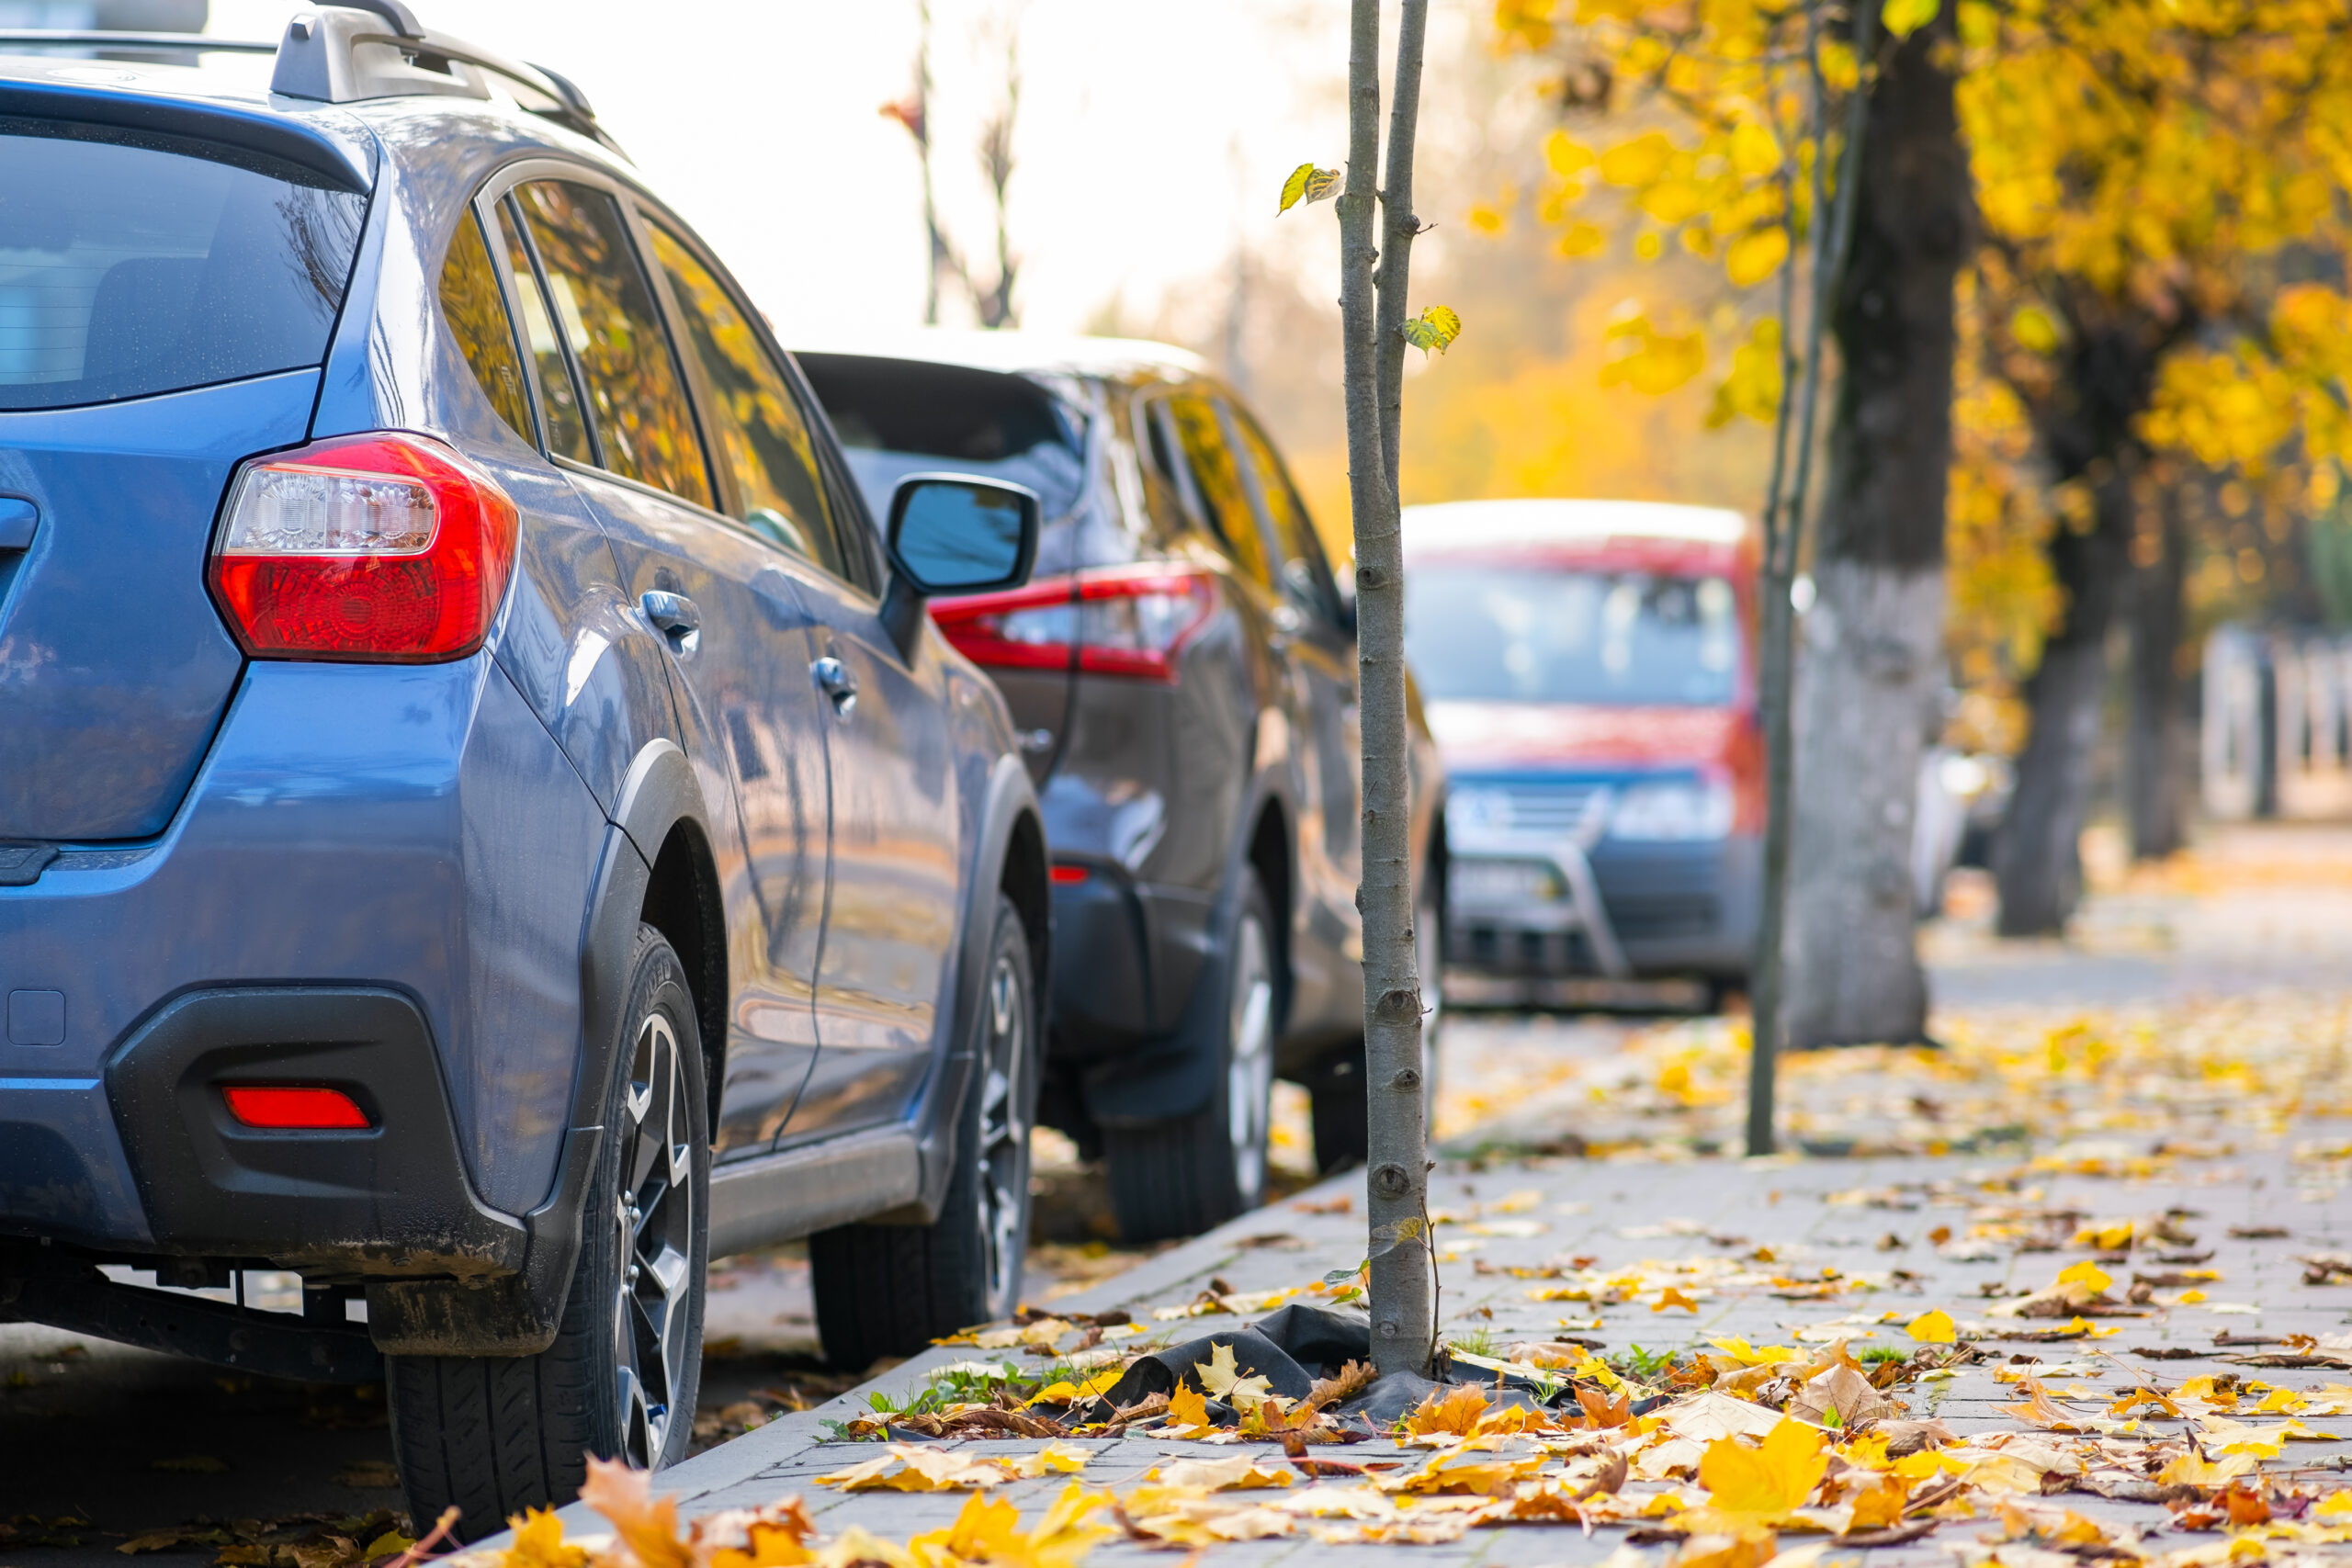 Cars parked in a row on a city street side on bright autumn day.